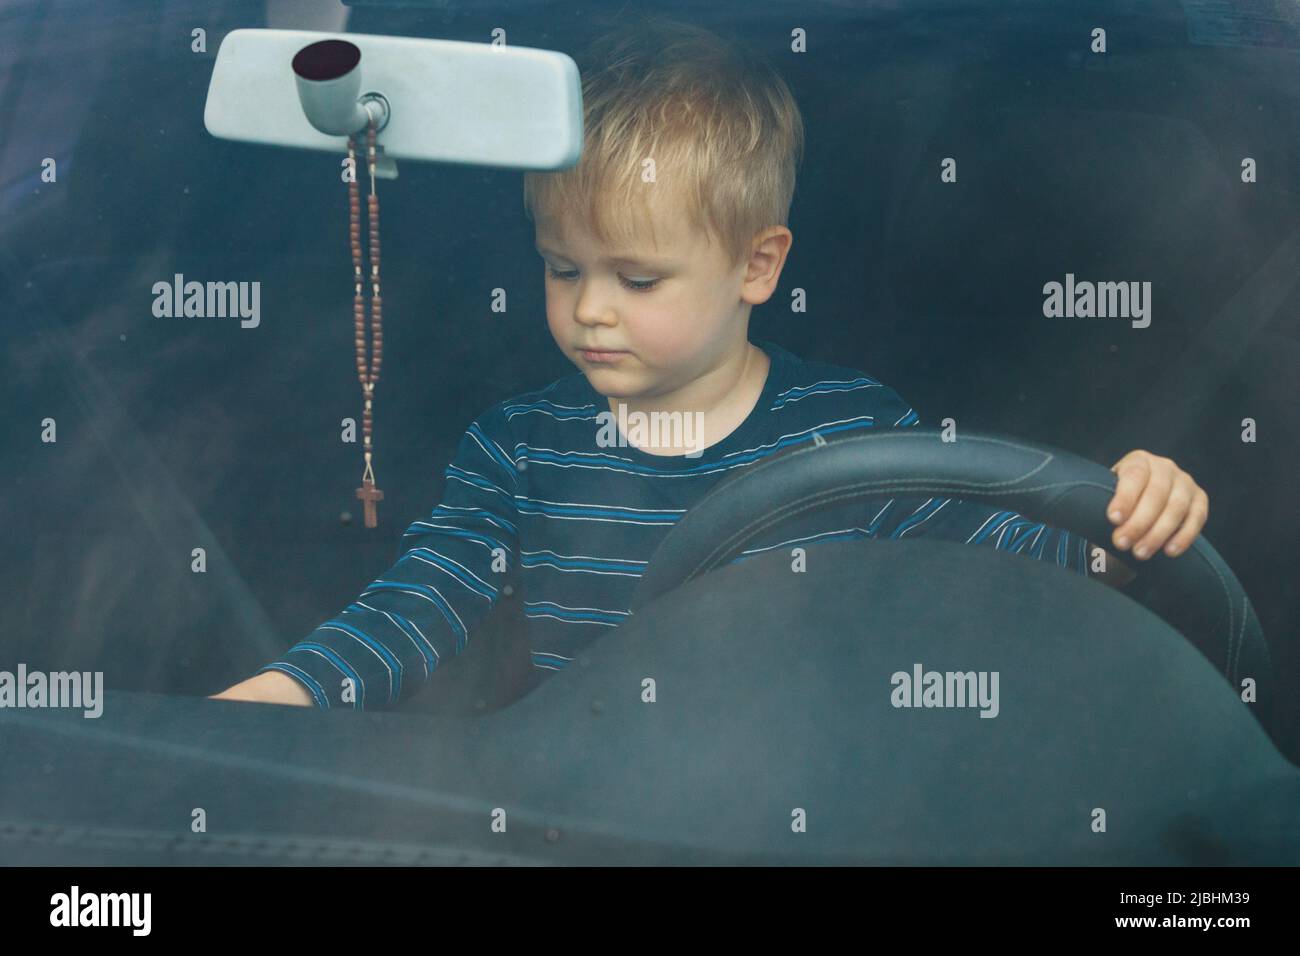 Cute little boy driving fathers car. Portrait of a child sitting in a car behind the wheel from the front. The boy plays and imagines he is driving, h Stock Photo